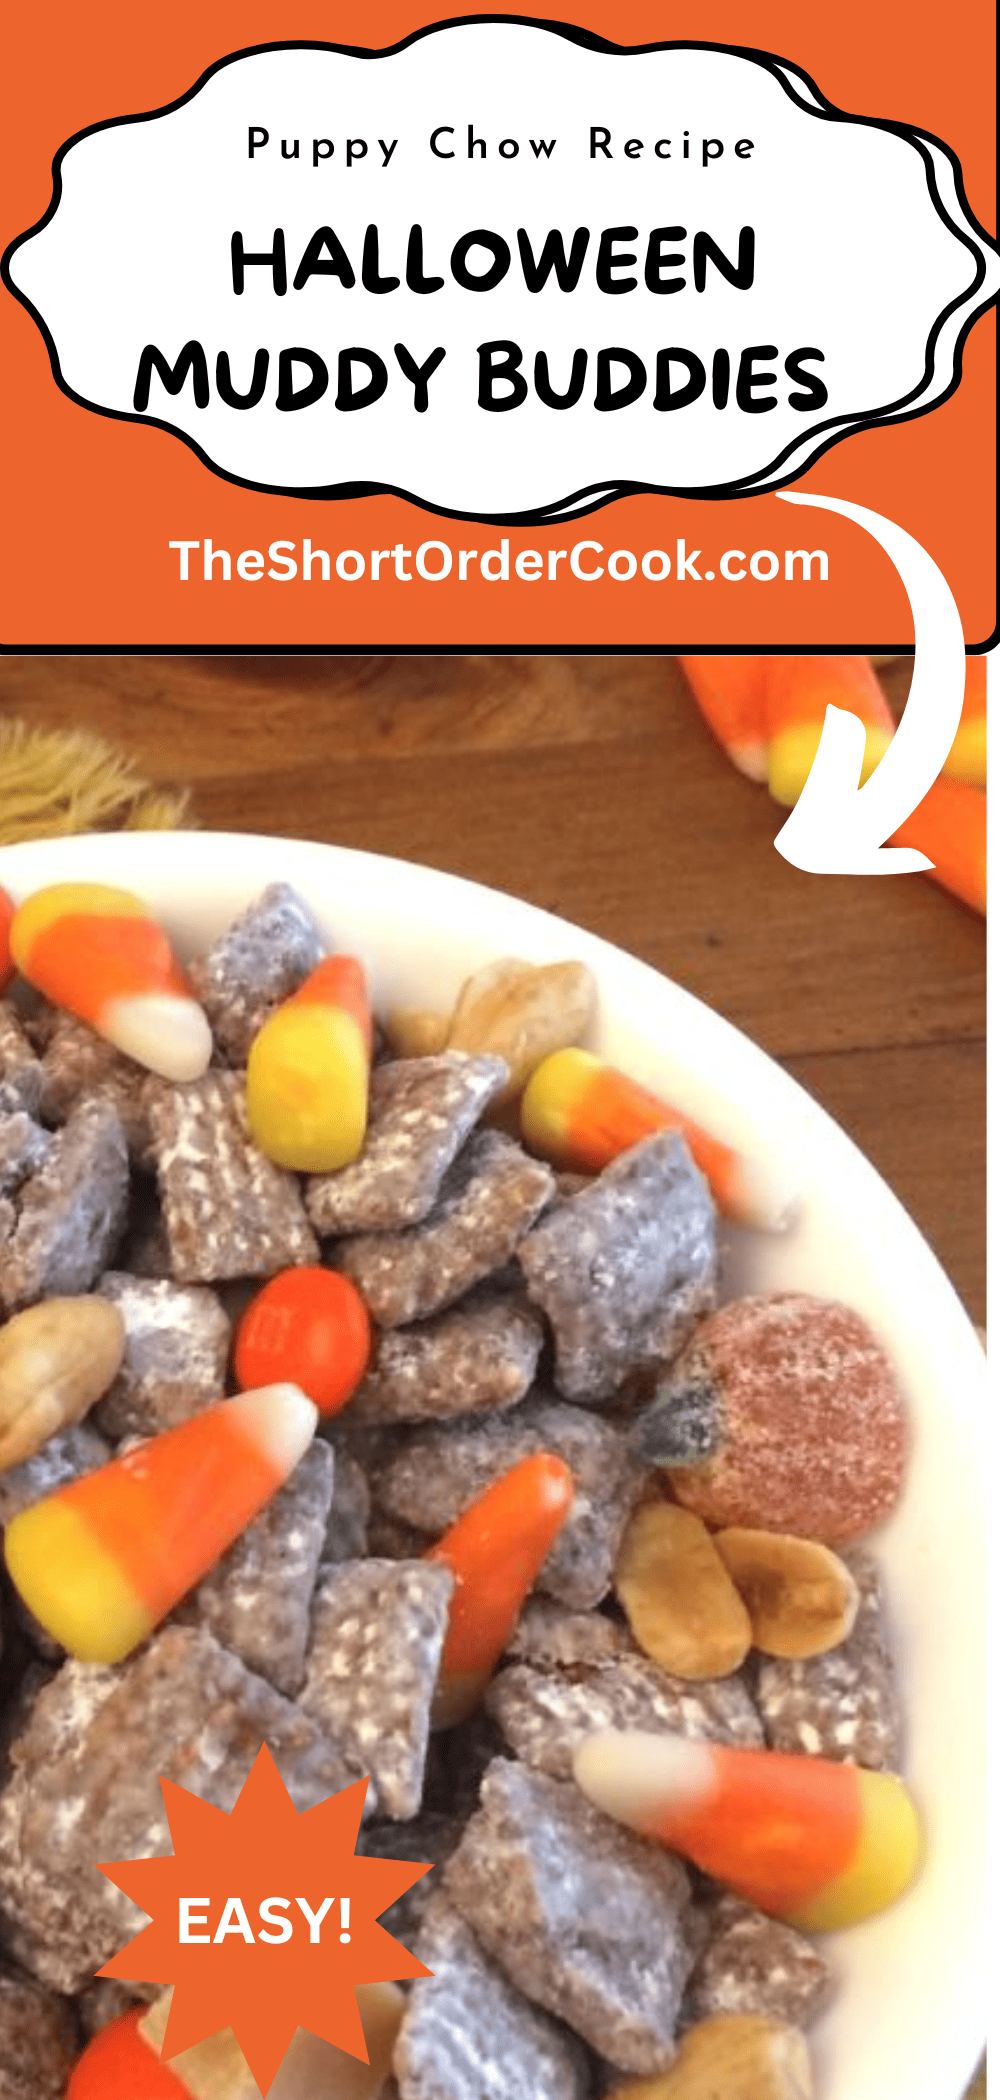 Bowl of chocolate muddy buddies with candy corn, caramels, gummy pumpkins, and peanuts for a Halloween sweet snack mix. 